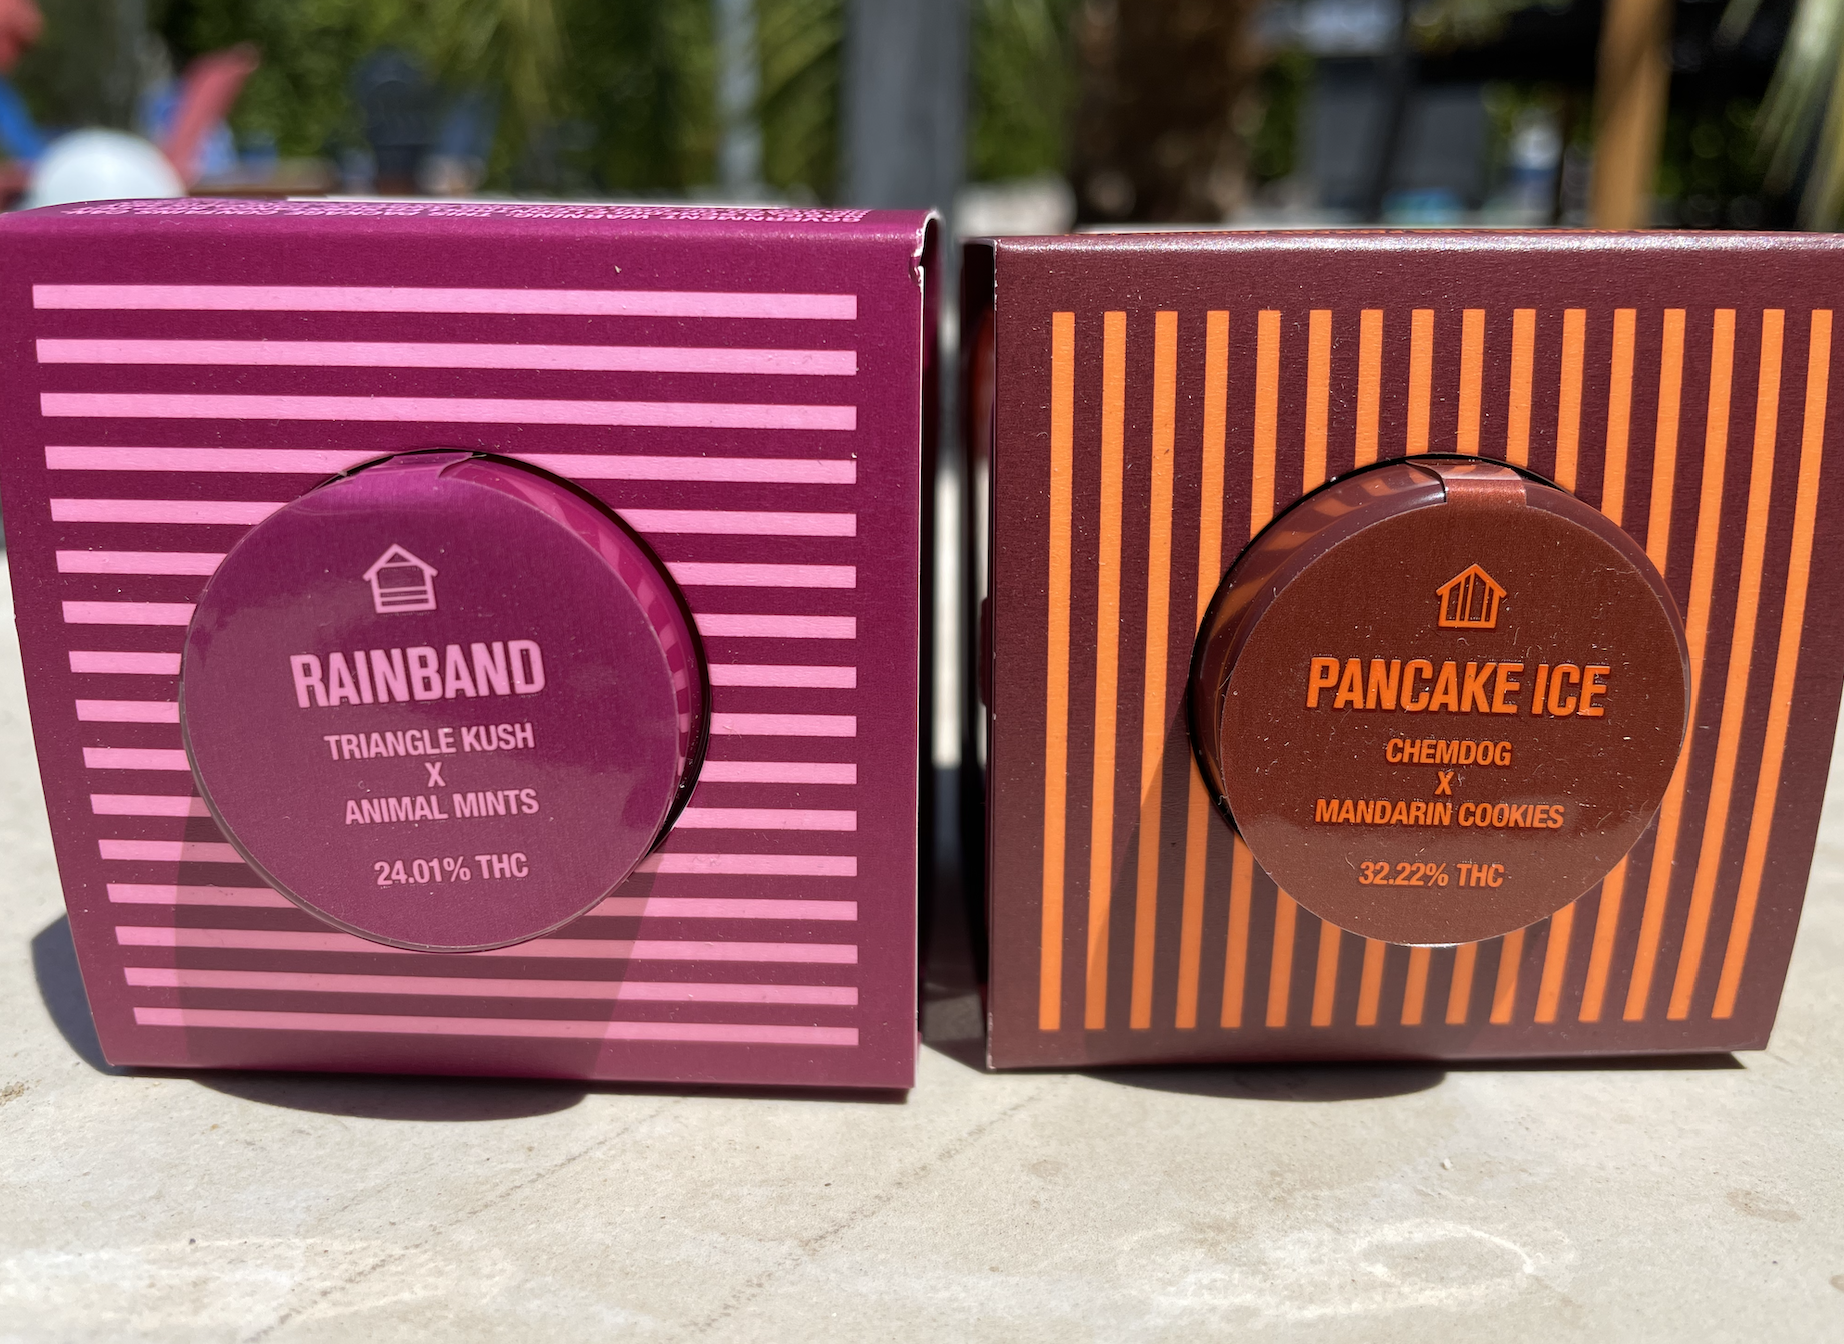 A side-by-side image of the two strains; Rainband and Pancake Ice